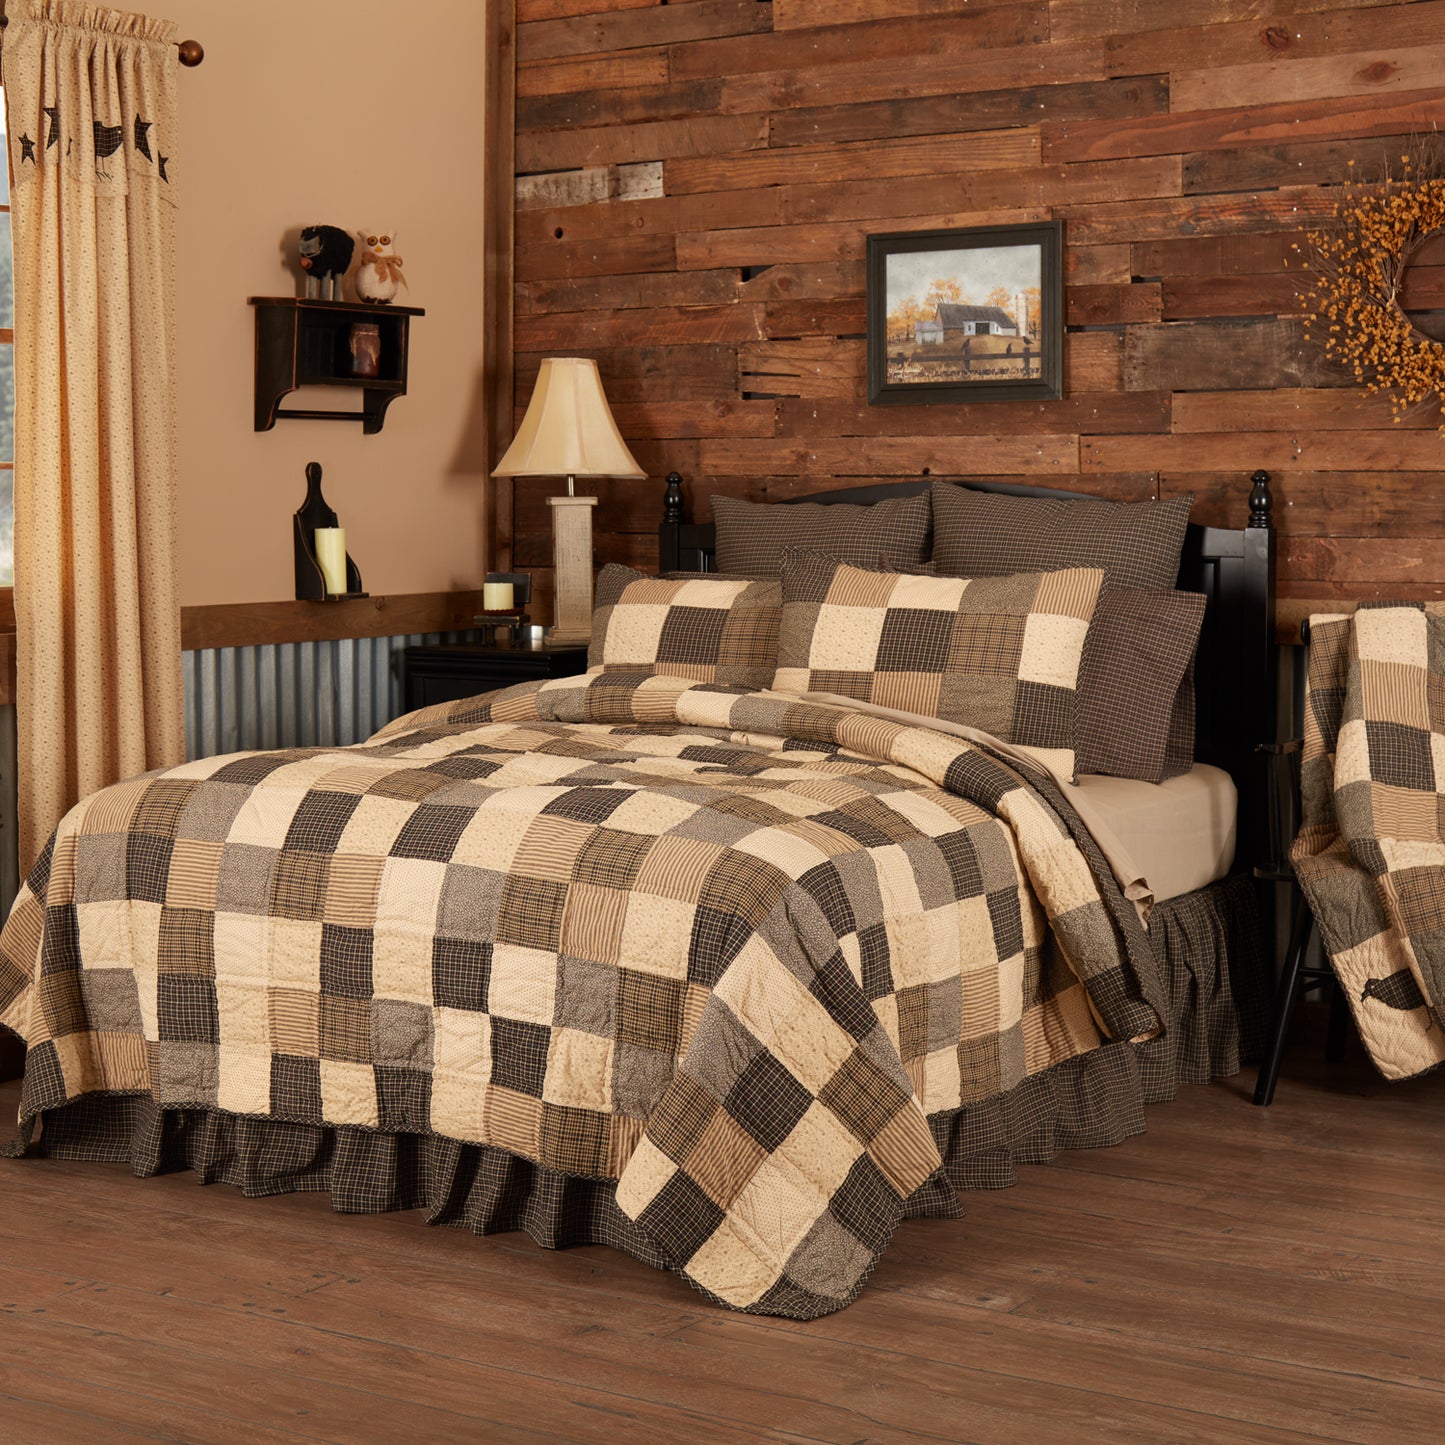 10145-Kettle-Grove-King-Quilt-110Wx97L-image-3